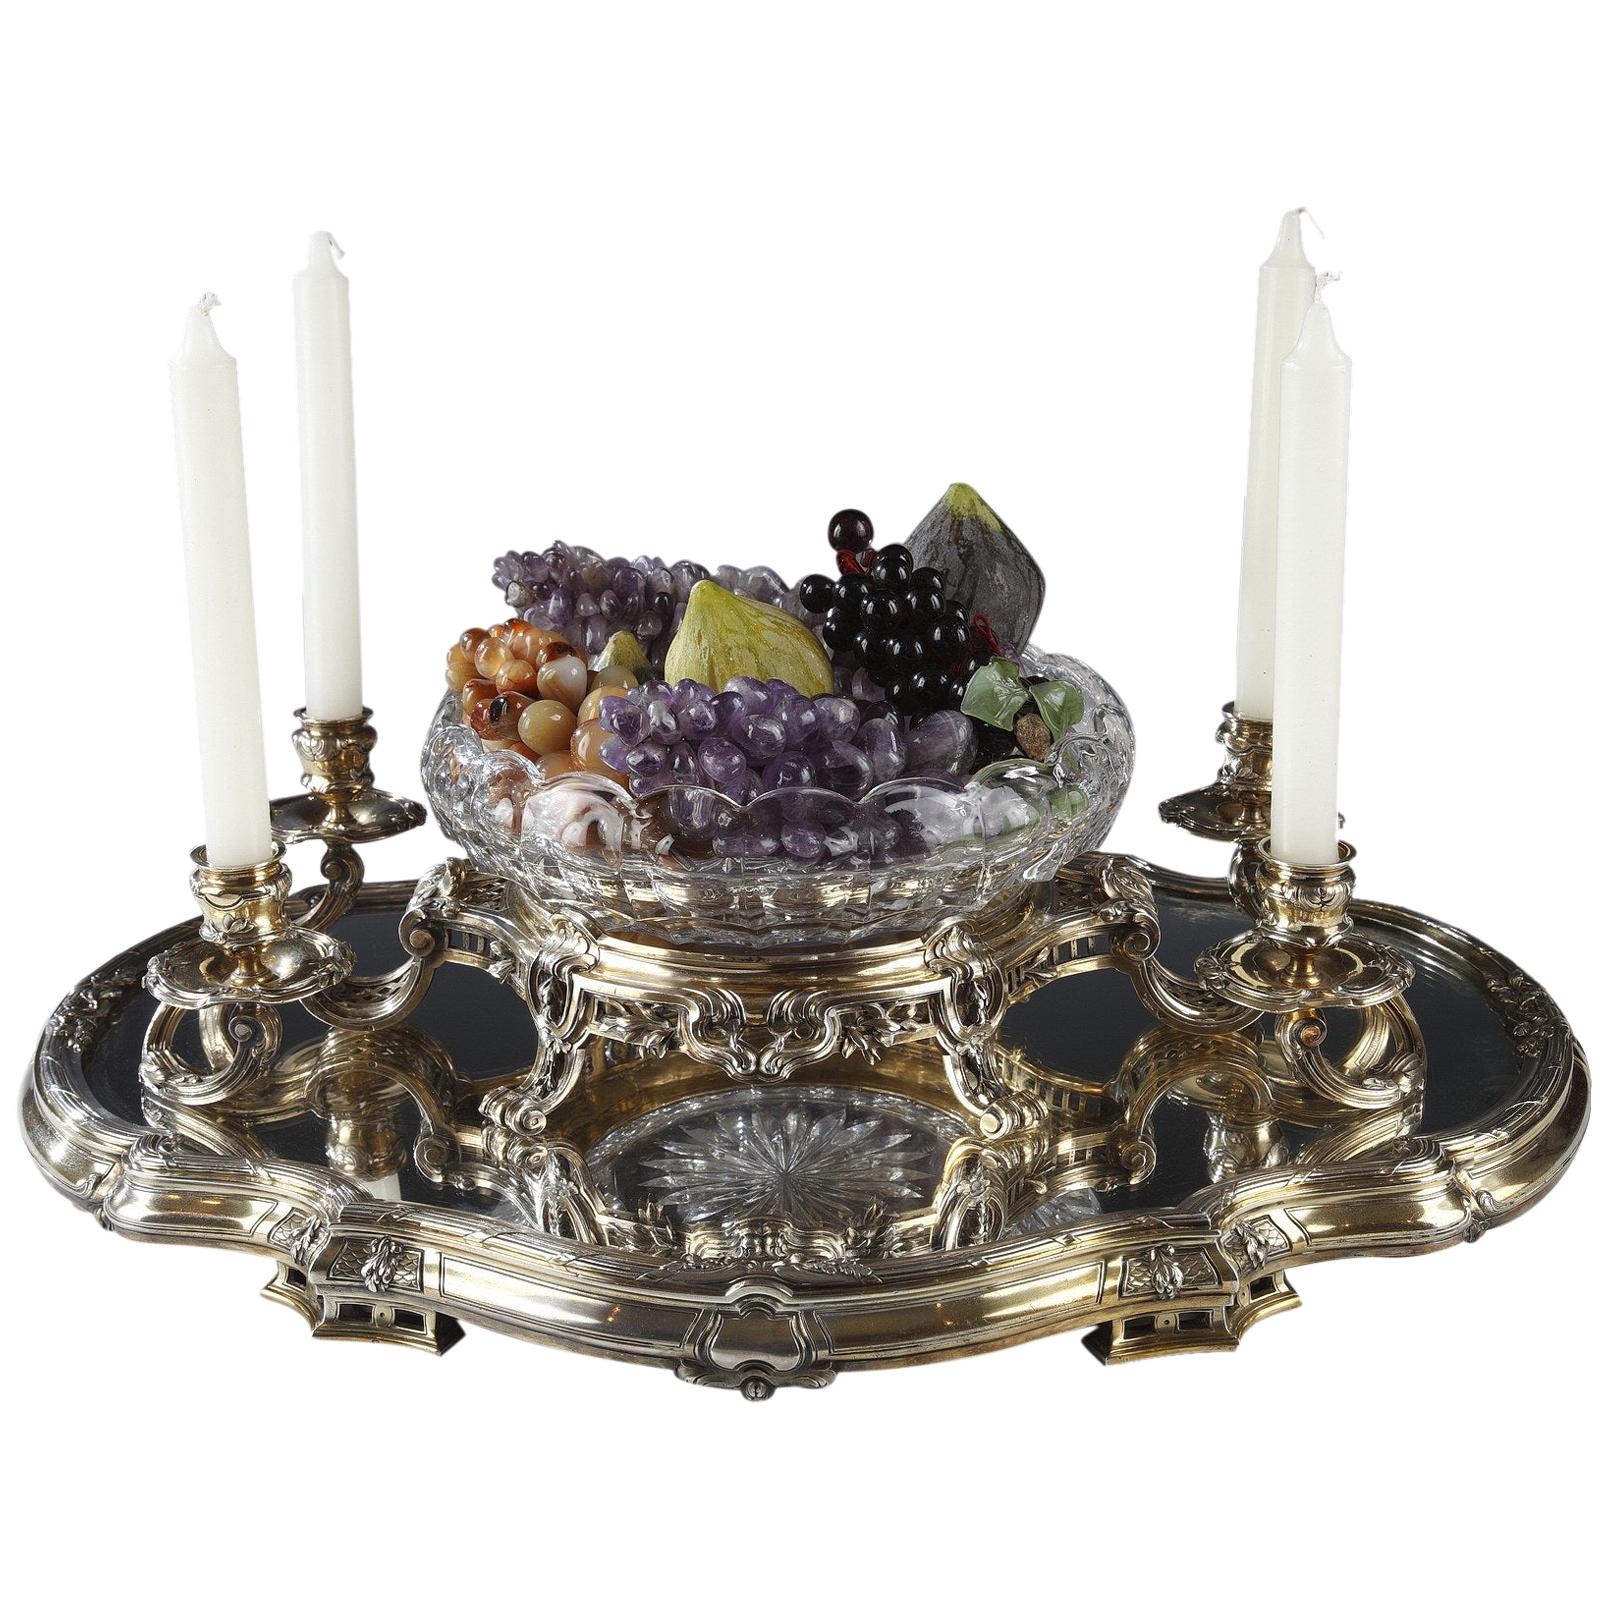 Charming Silver-Gilt Centerpiece by Boin-Taburet, France, Circa 1880 For  Sale at 1stDibs